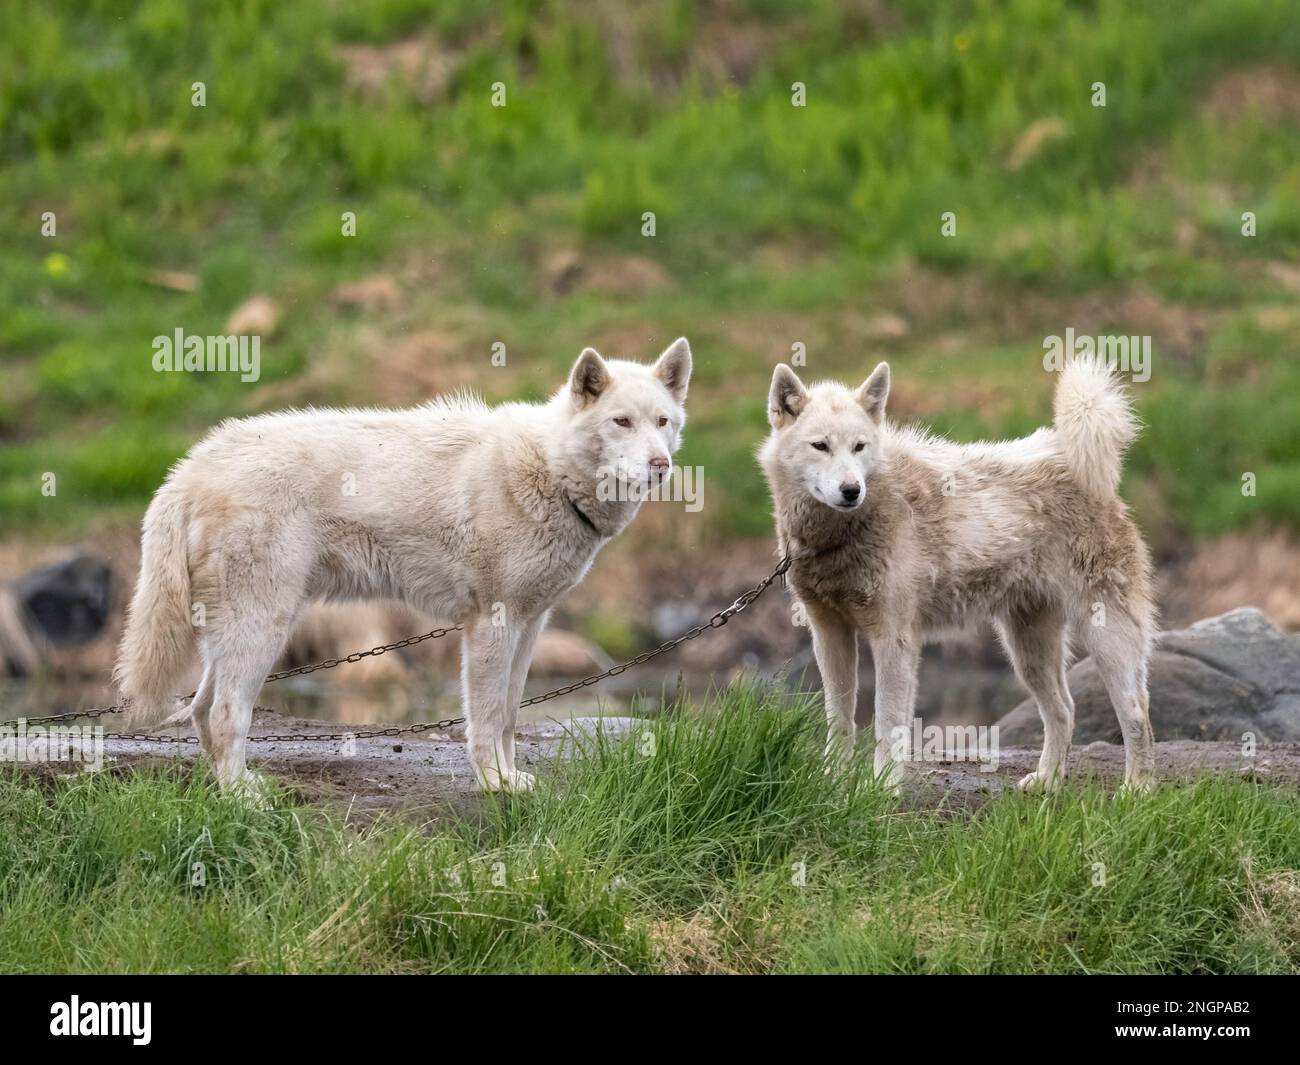 Adult Greenland dogs, Canis familiaris, kept on chains as sled dogs in Sisimiut, Greenland. Stock Photo